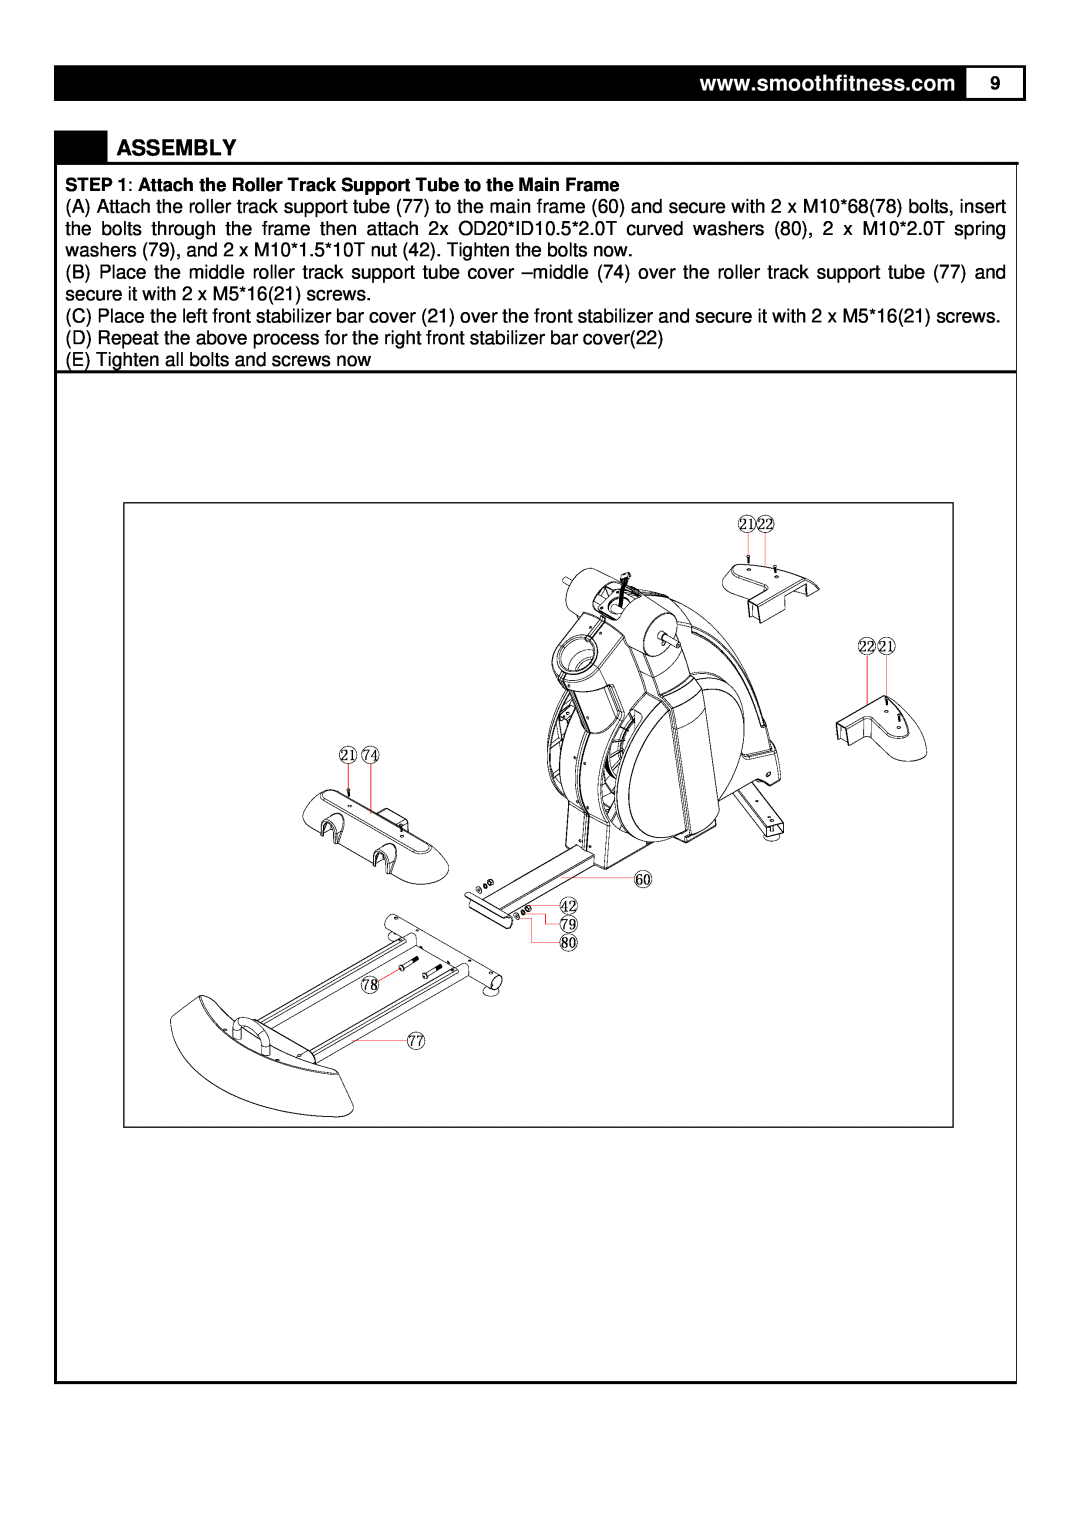 Smooth Fitness CE-3.0 user manual Assembly, D Repeat the above process for the right front stabilizer bar cover22 